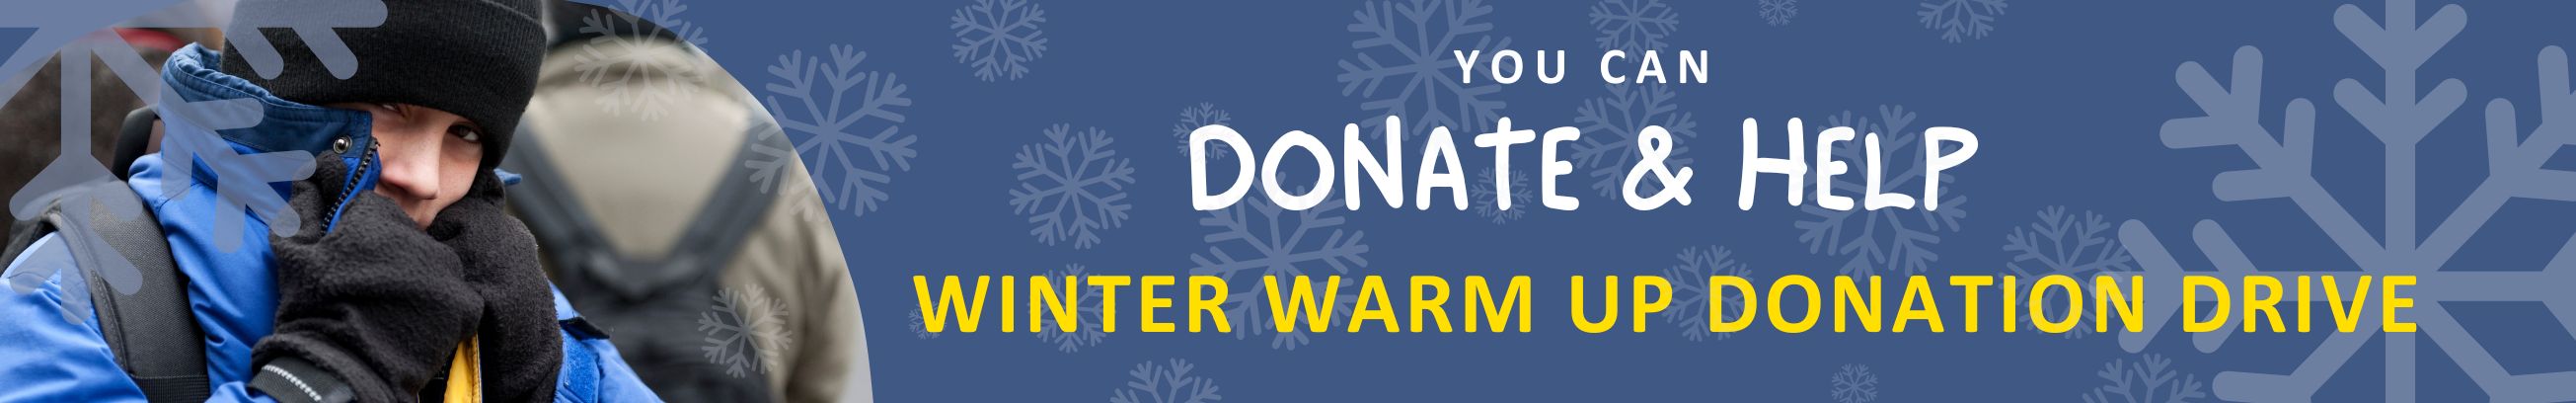 Winter Warm Up Donation Drive